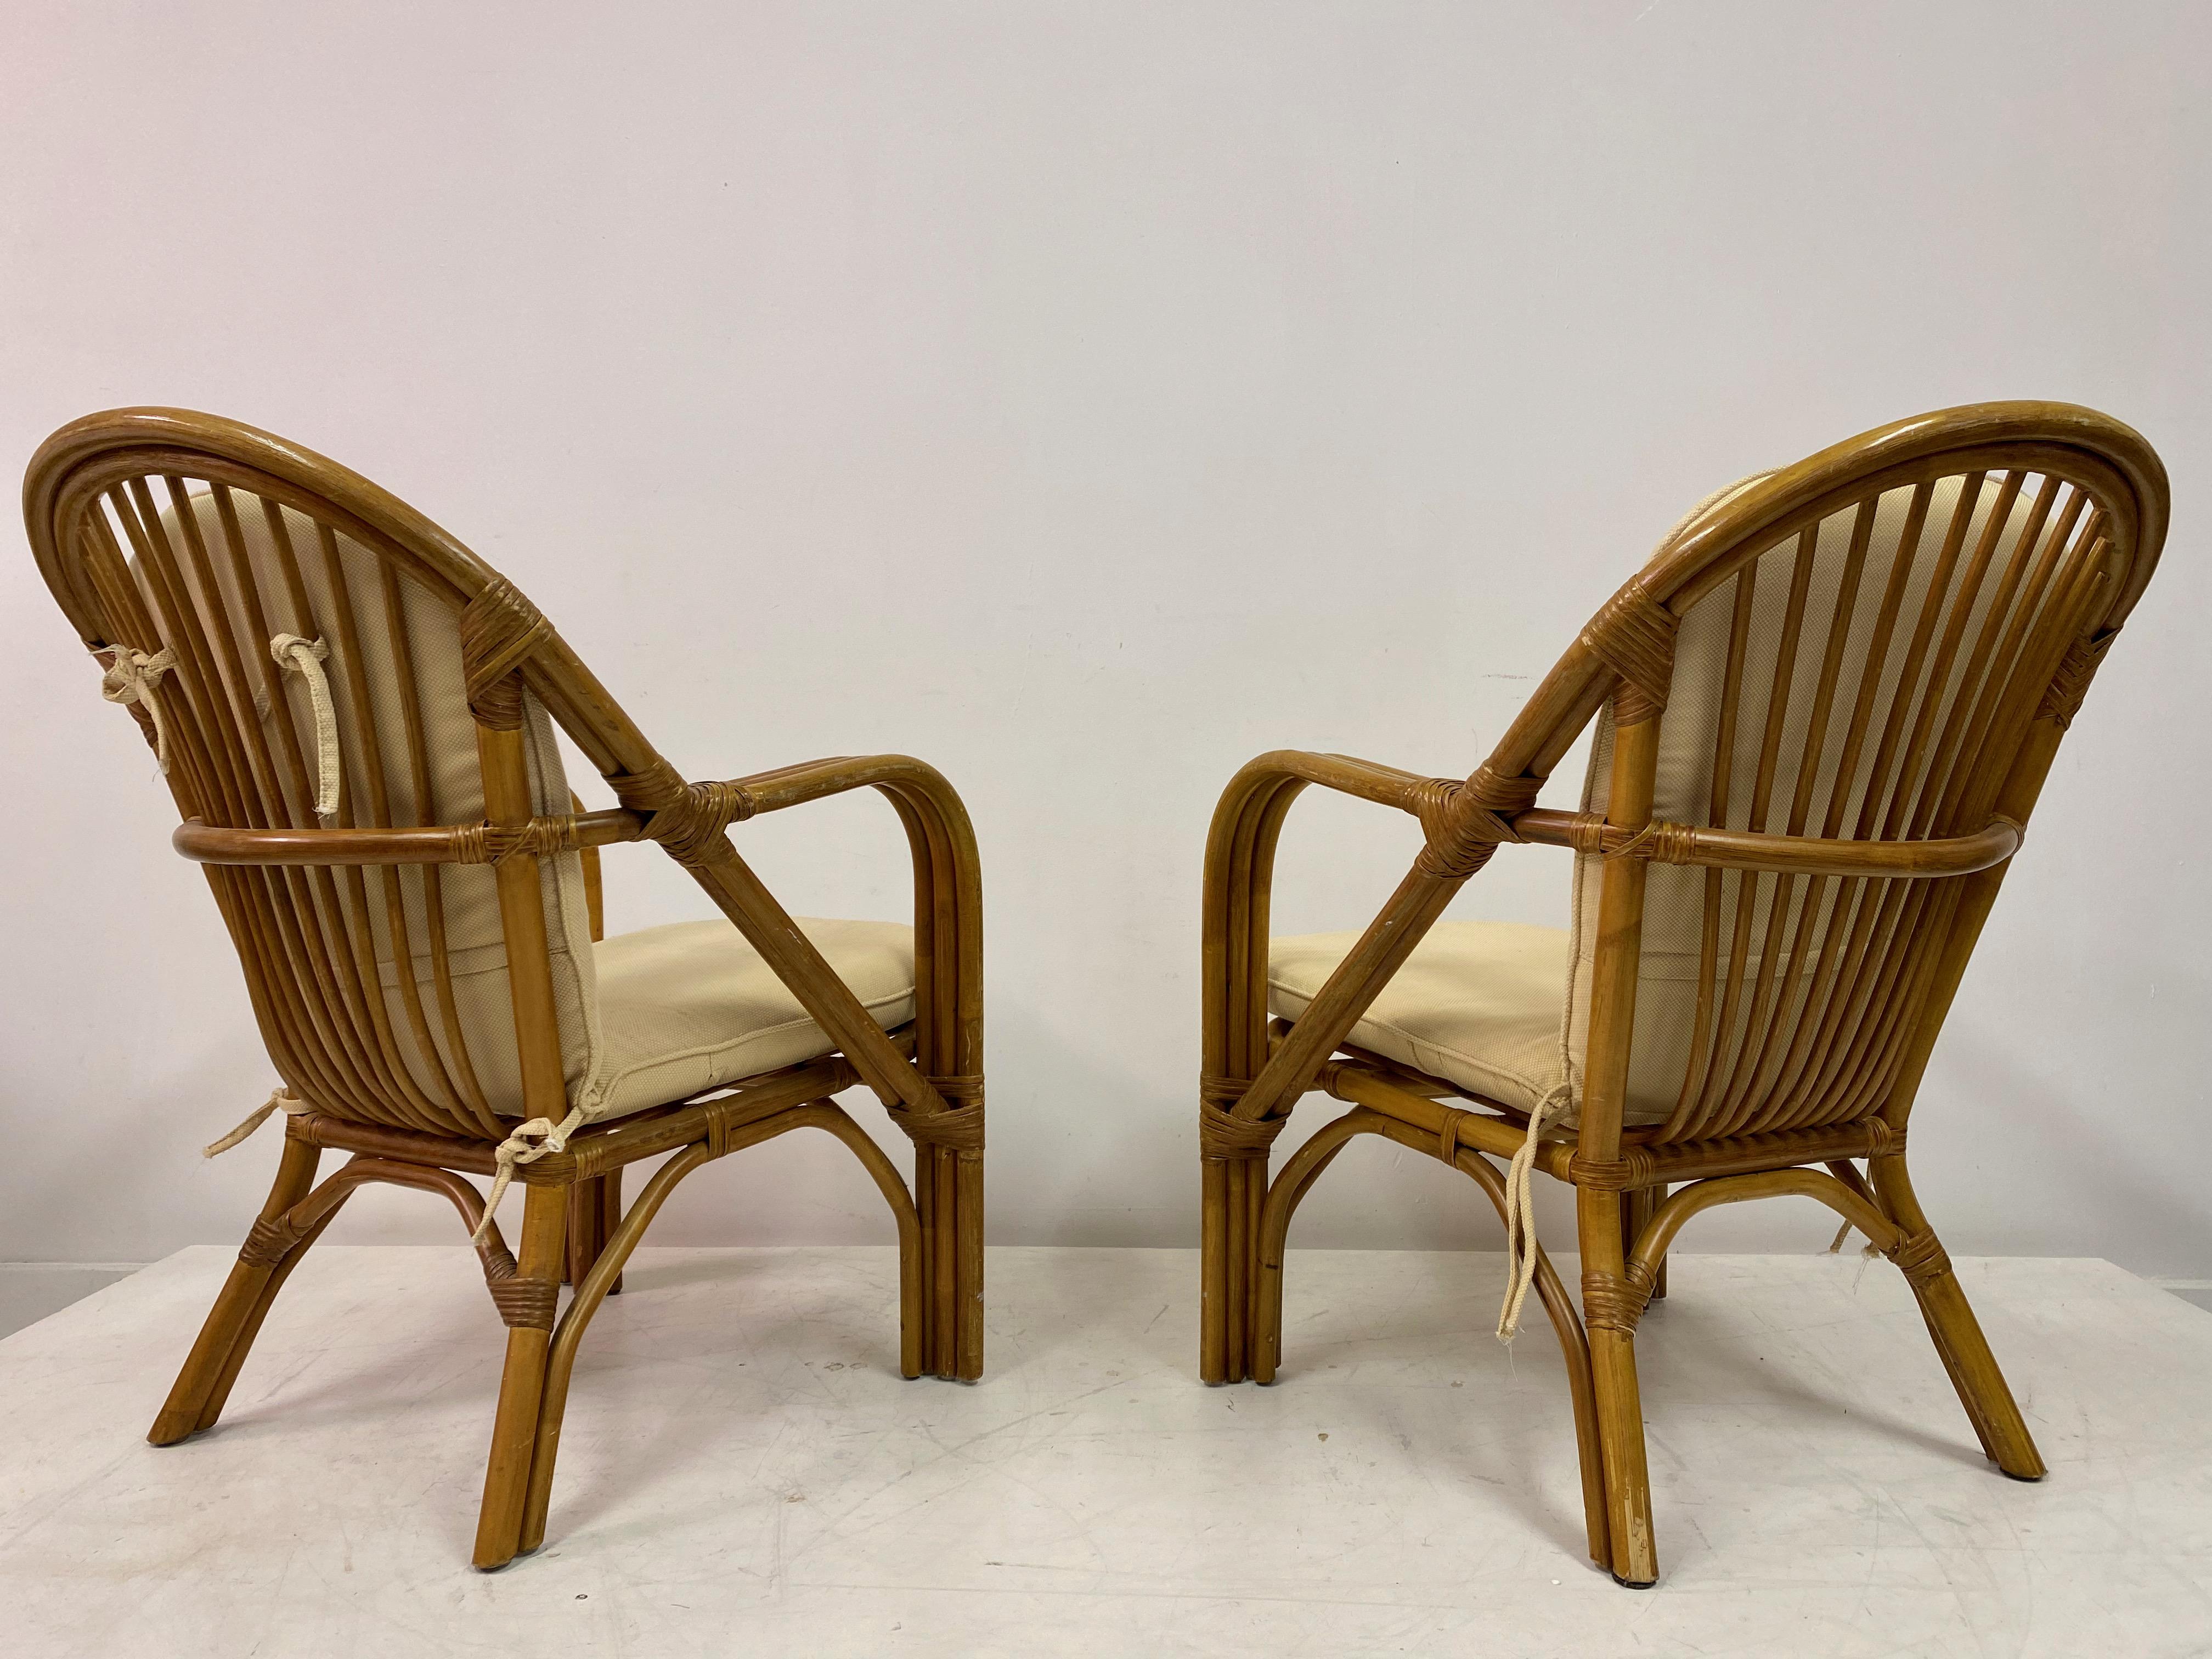 Pair of 1970s Italian Bamboo Armchairs In Good Condition For Sale In London, London